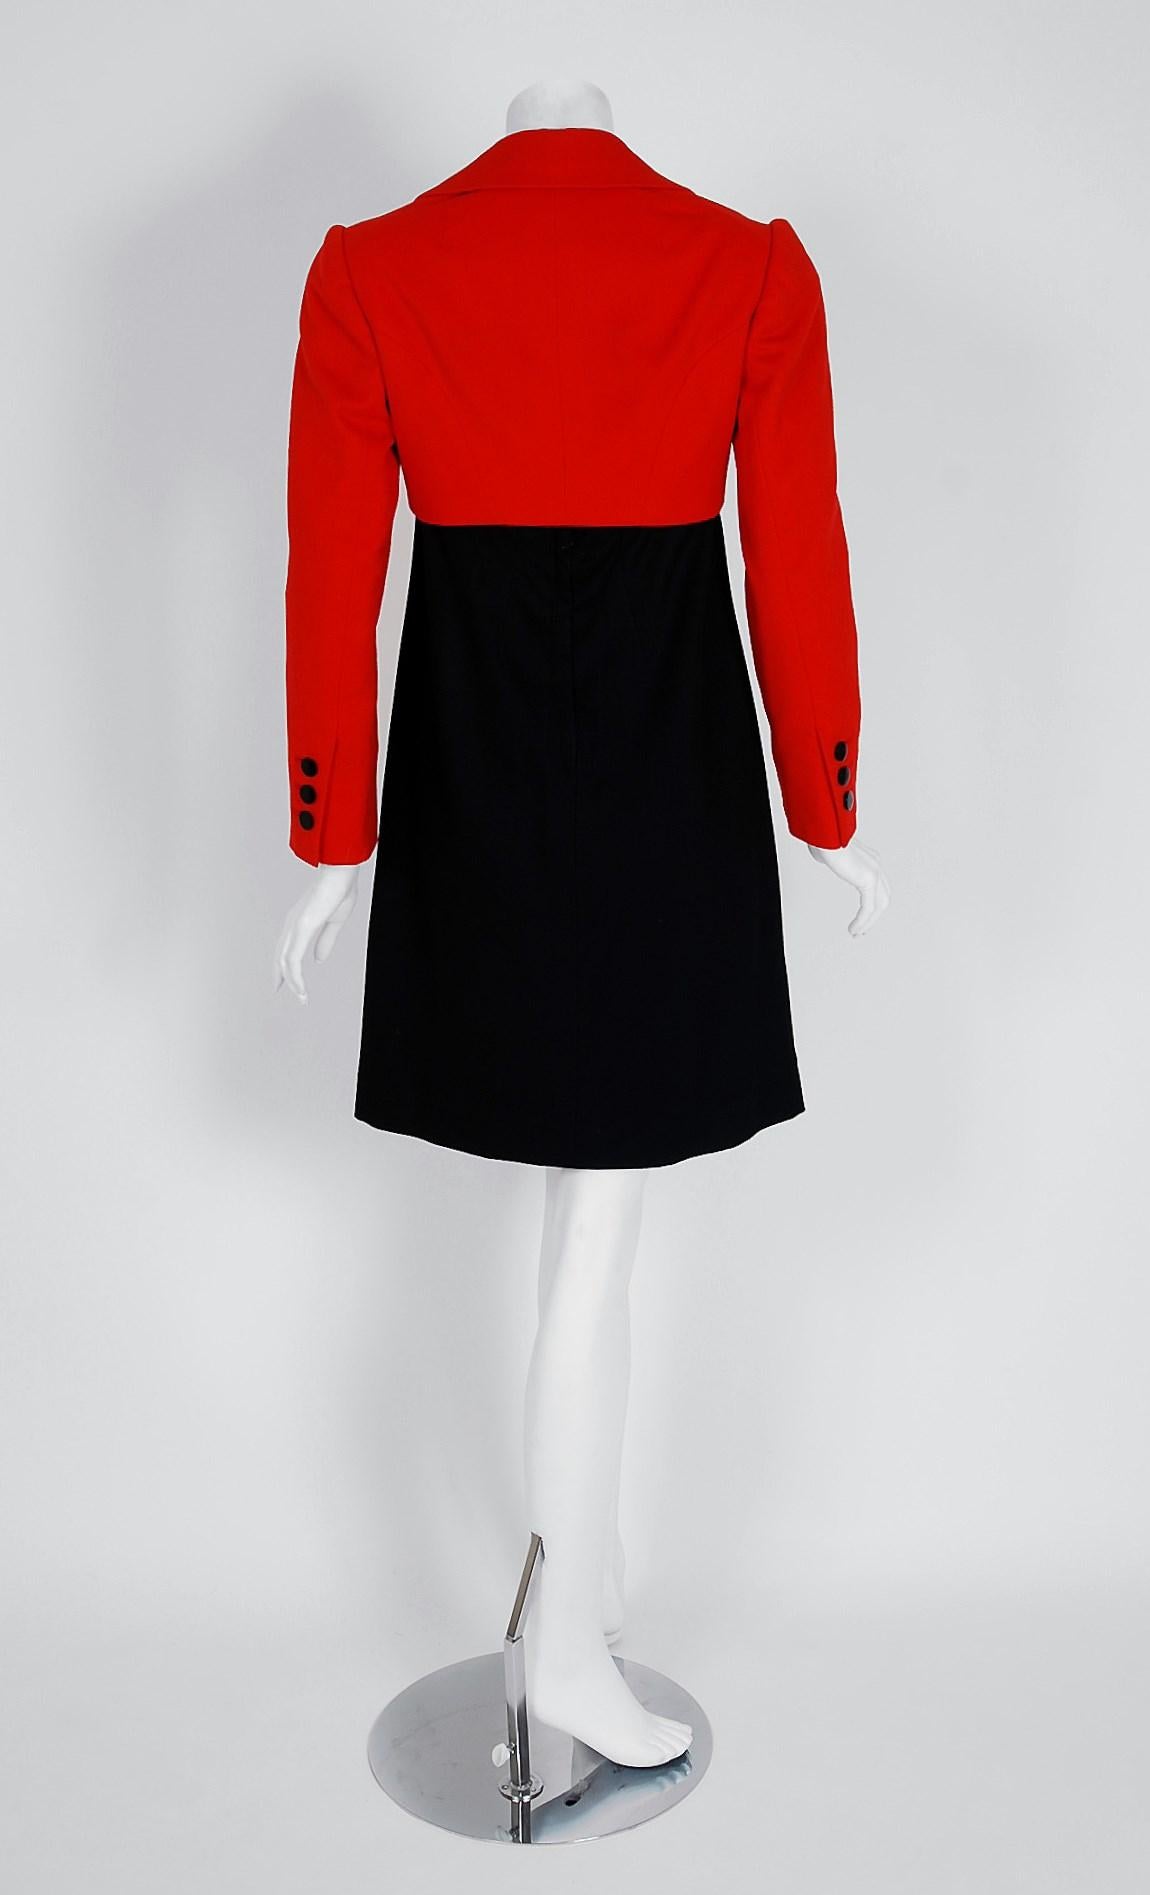 1957 Traina-Norell Red Black Wool Cropped Double-Breasted Jacket & Dress Suit 3